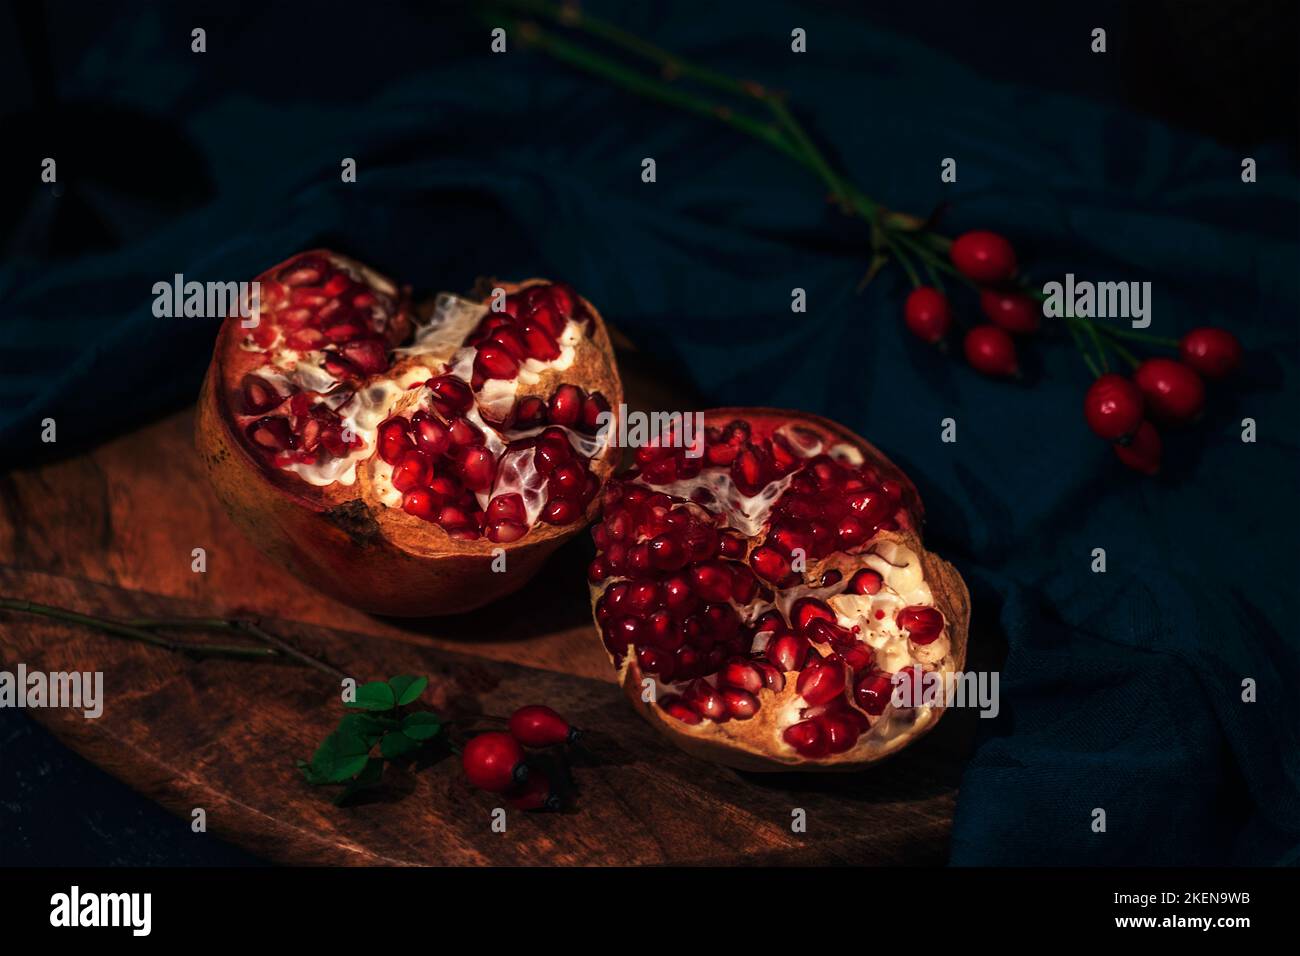 Pomegranate on a cutting board and rosehip branches on black table. Still life. Closeup. Stock Photo